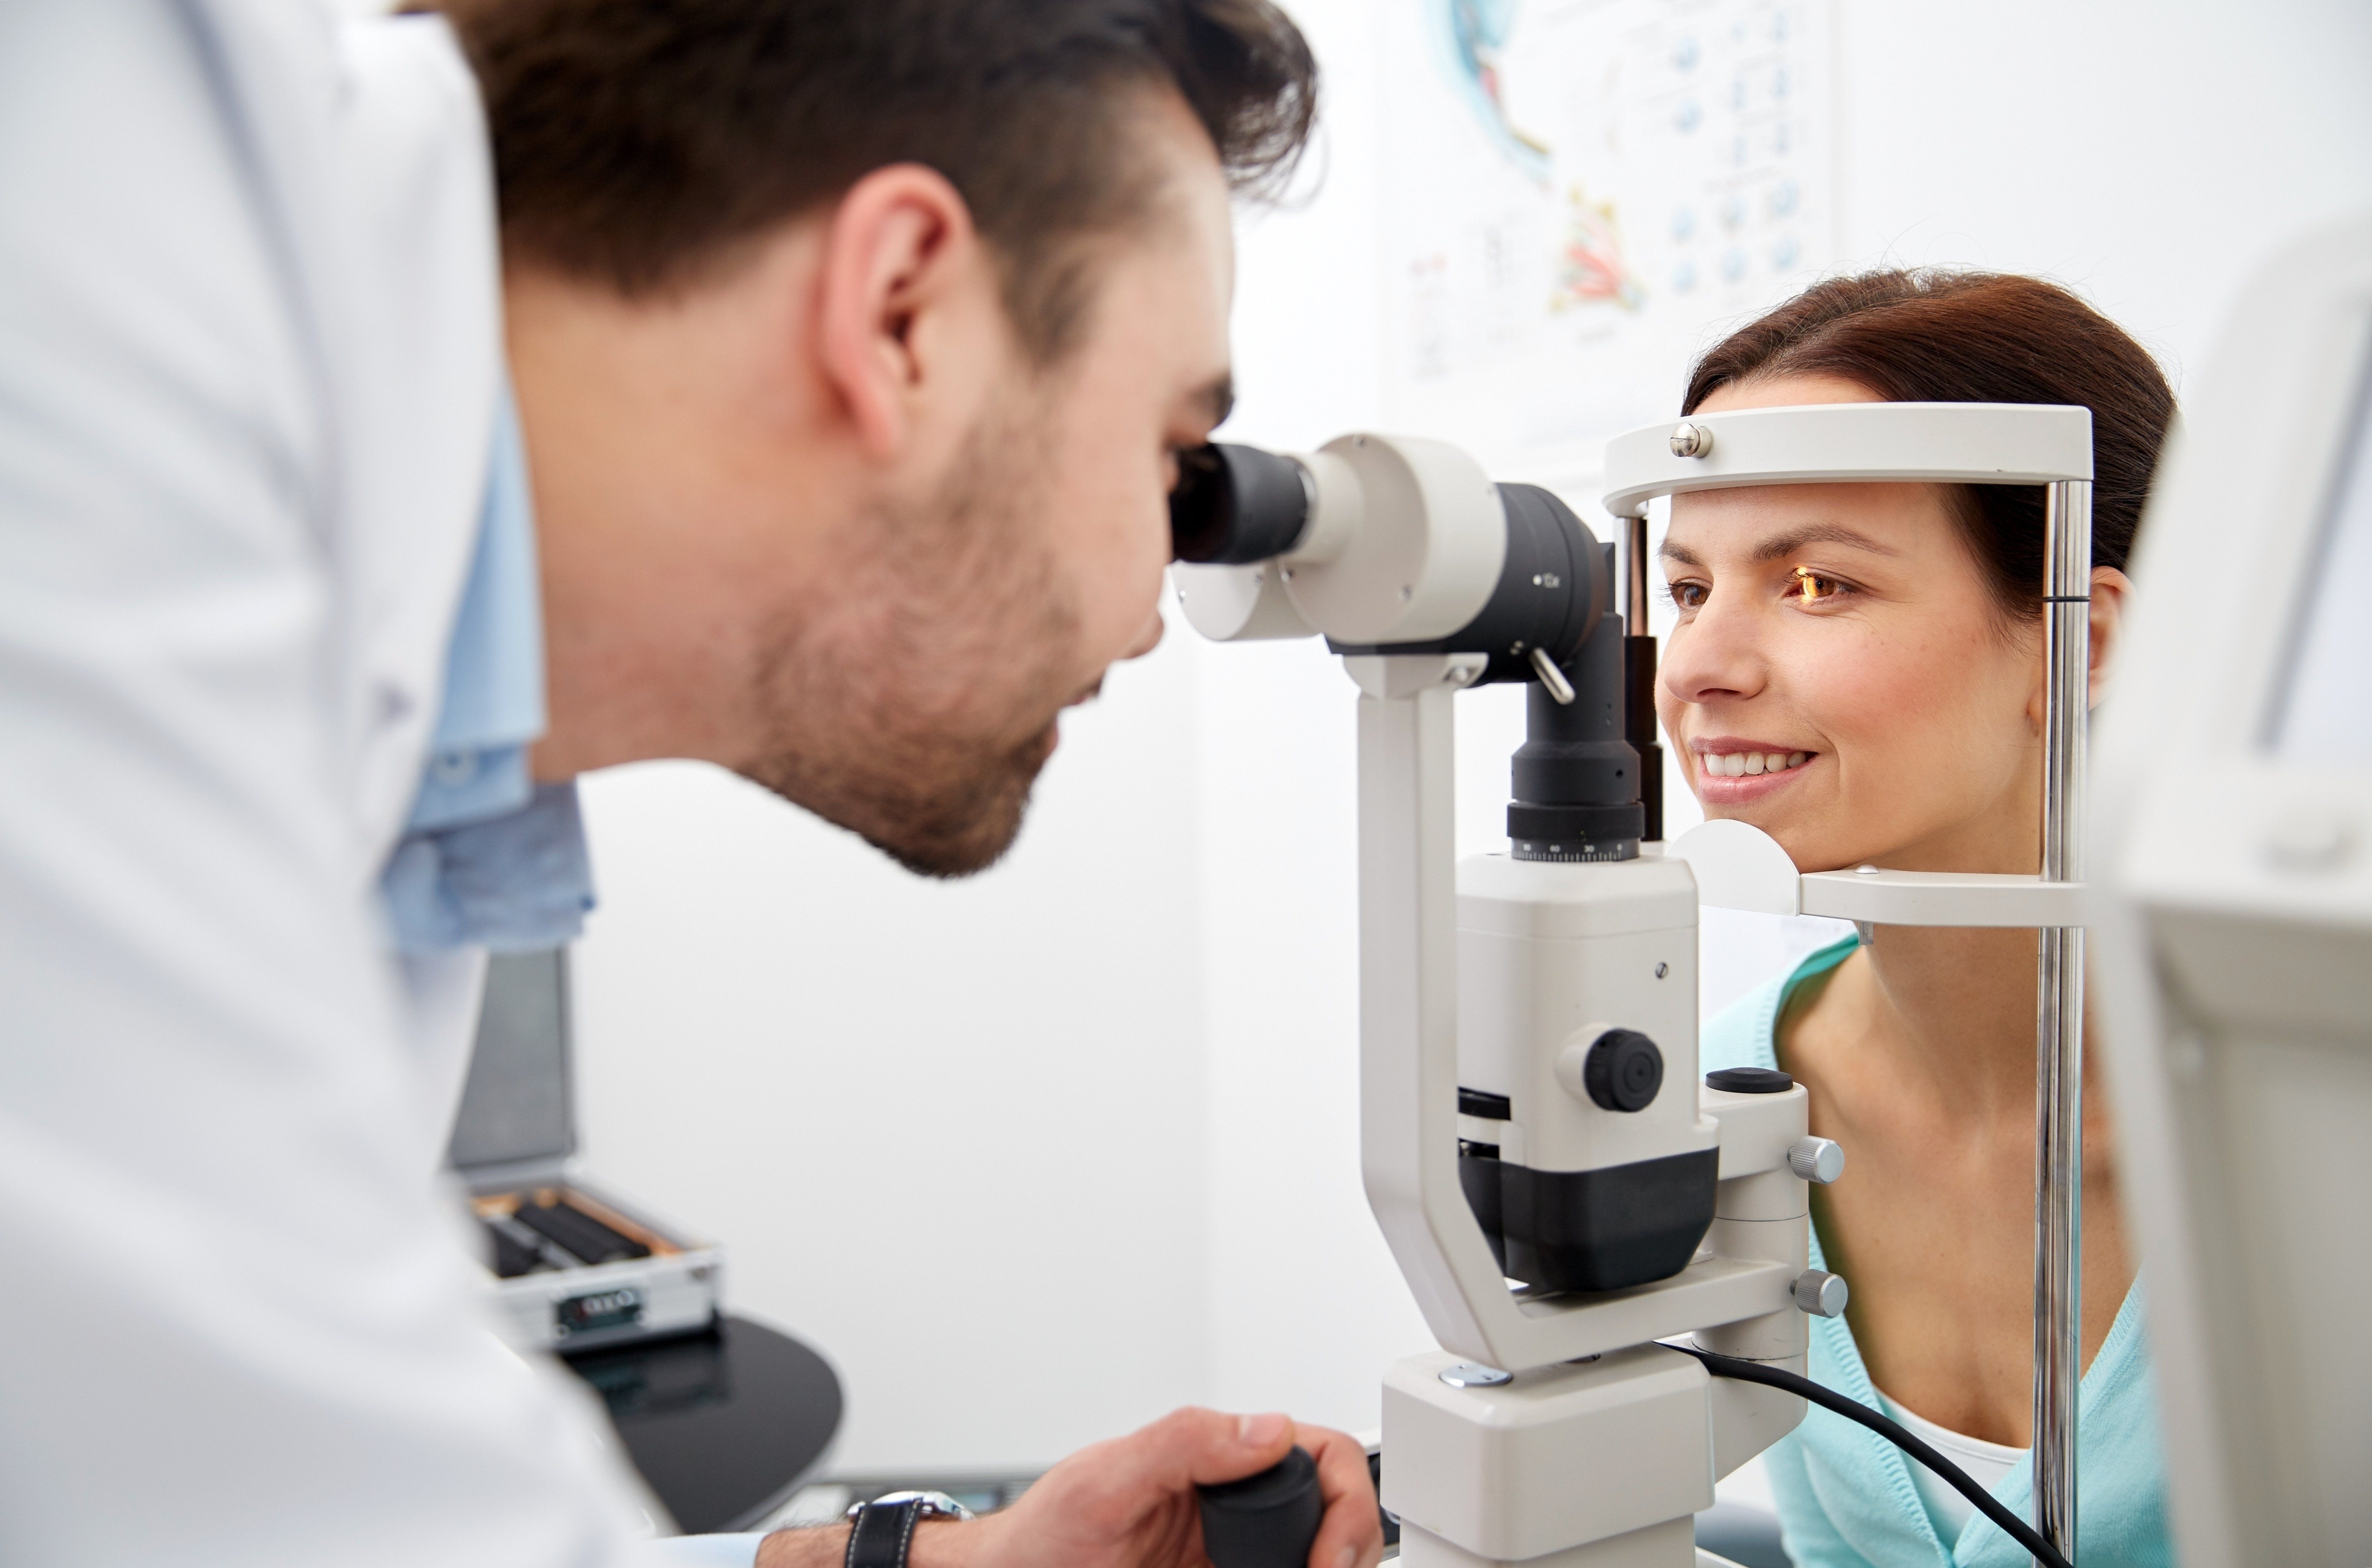 What to Expect During Your Contact Lens Exam